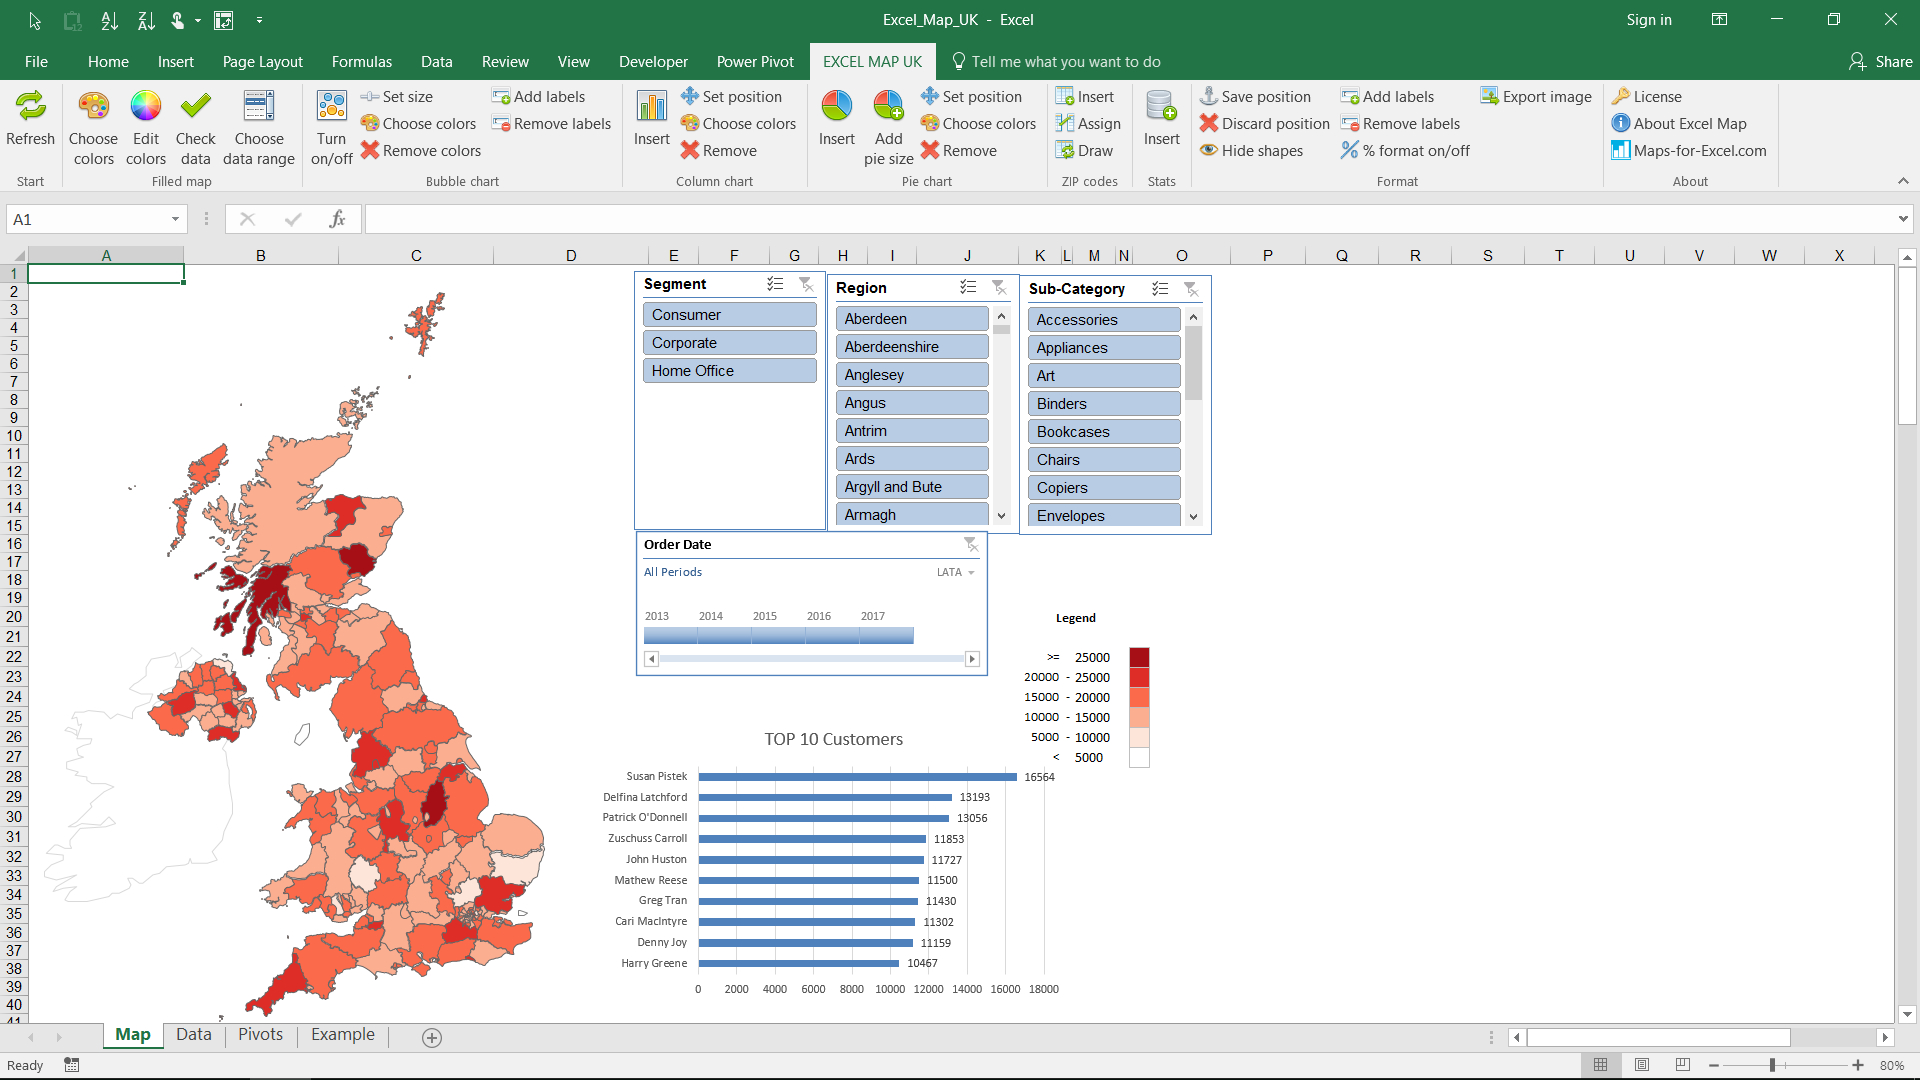 Work From Home Creating Spreadsheets Uk In How To Create An Interactive Excel Dashboard With Slicers? – Example